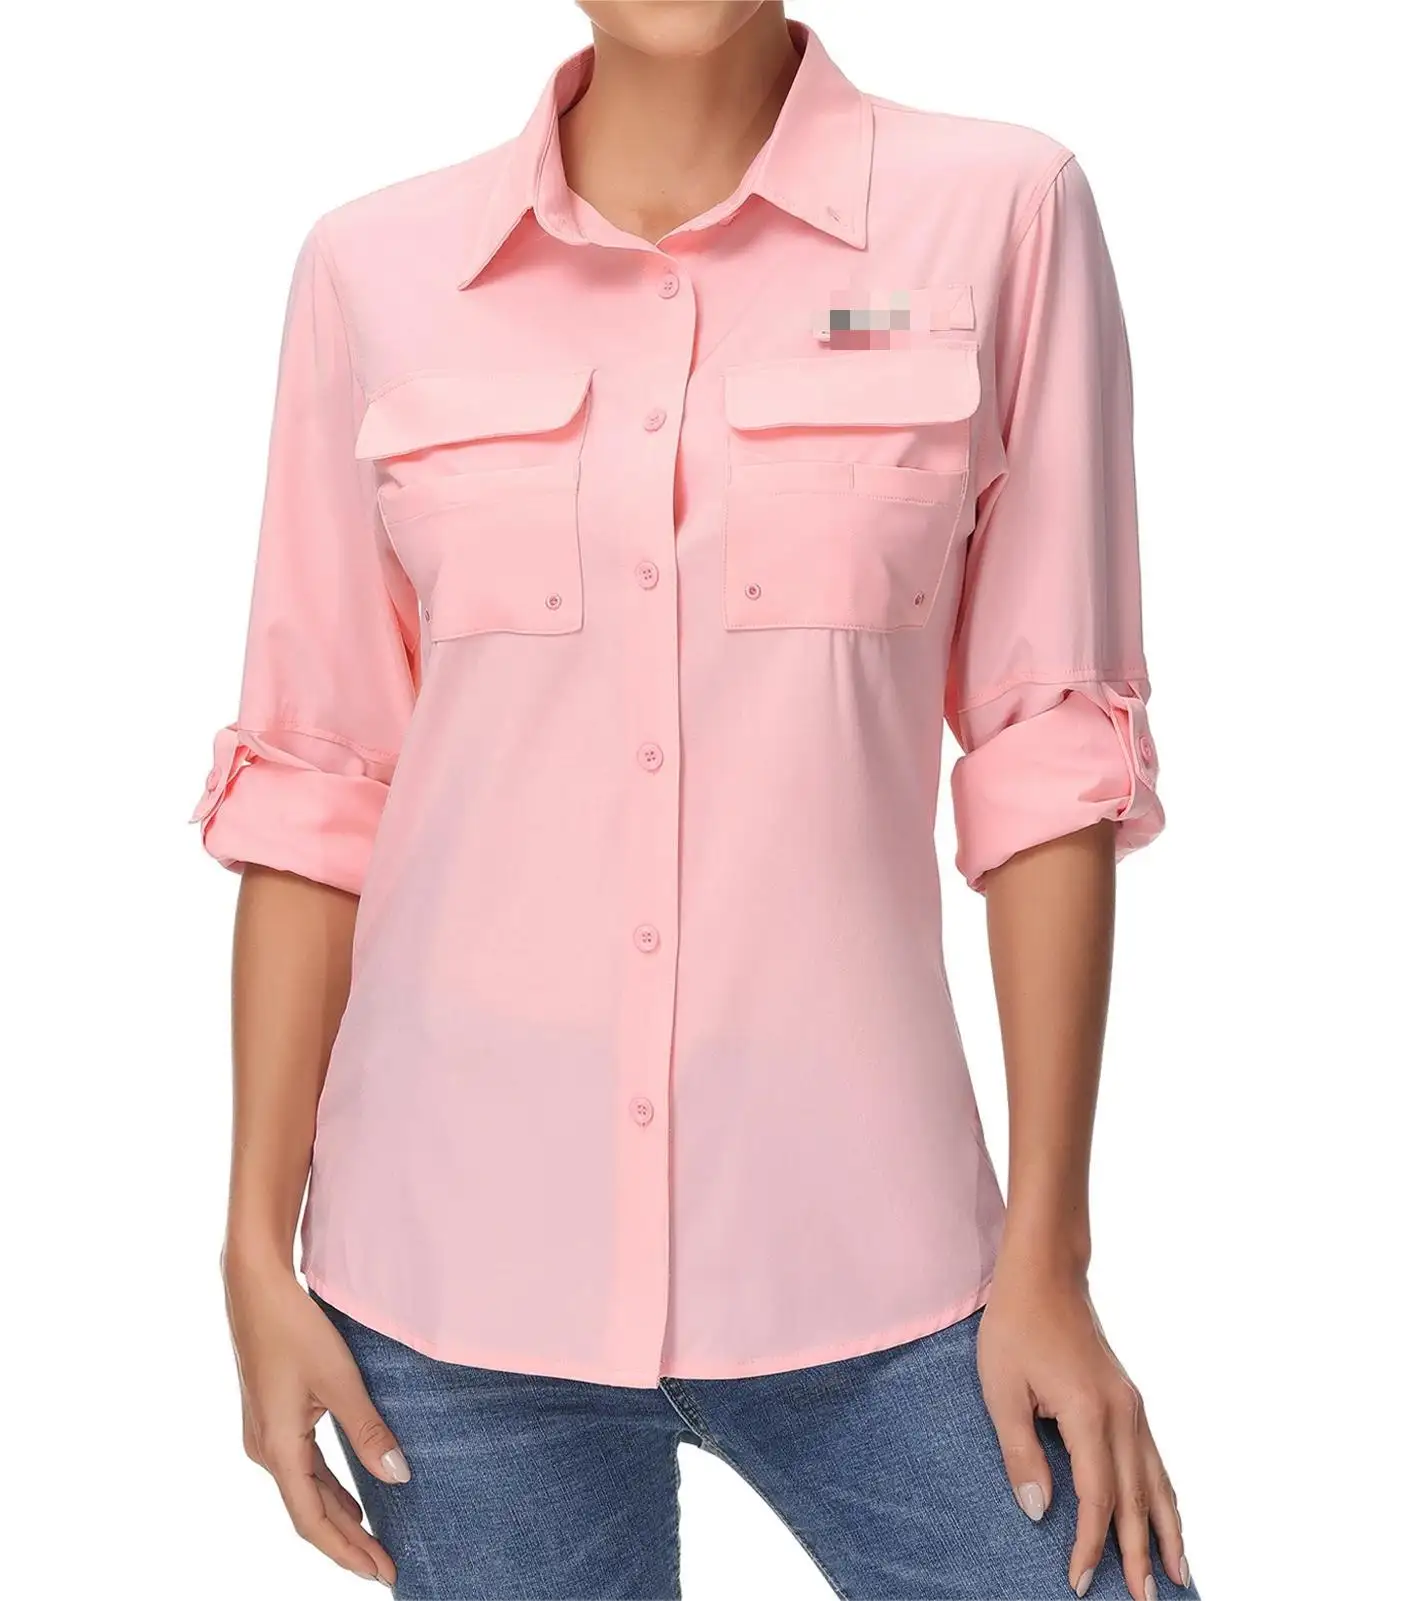 Women's UPF 50 Button Down Fishing Shirt Performance Quick Dry Summer Outdoors Clothing OEM